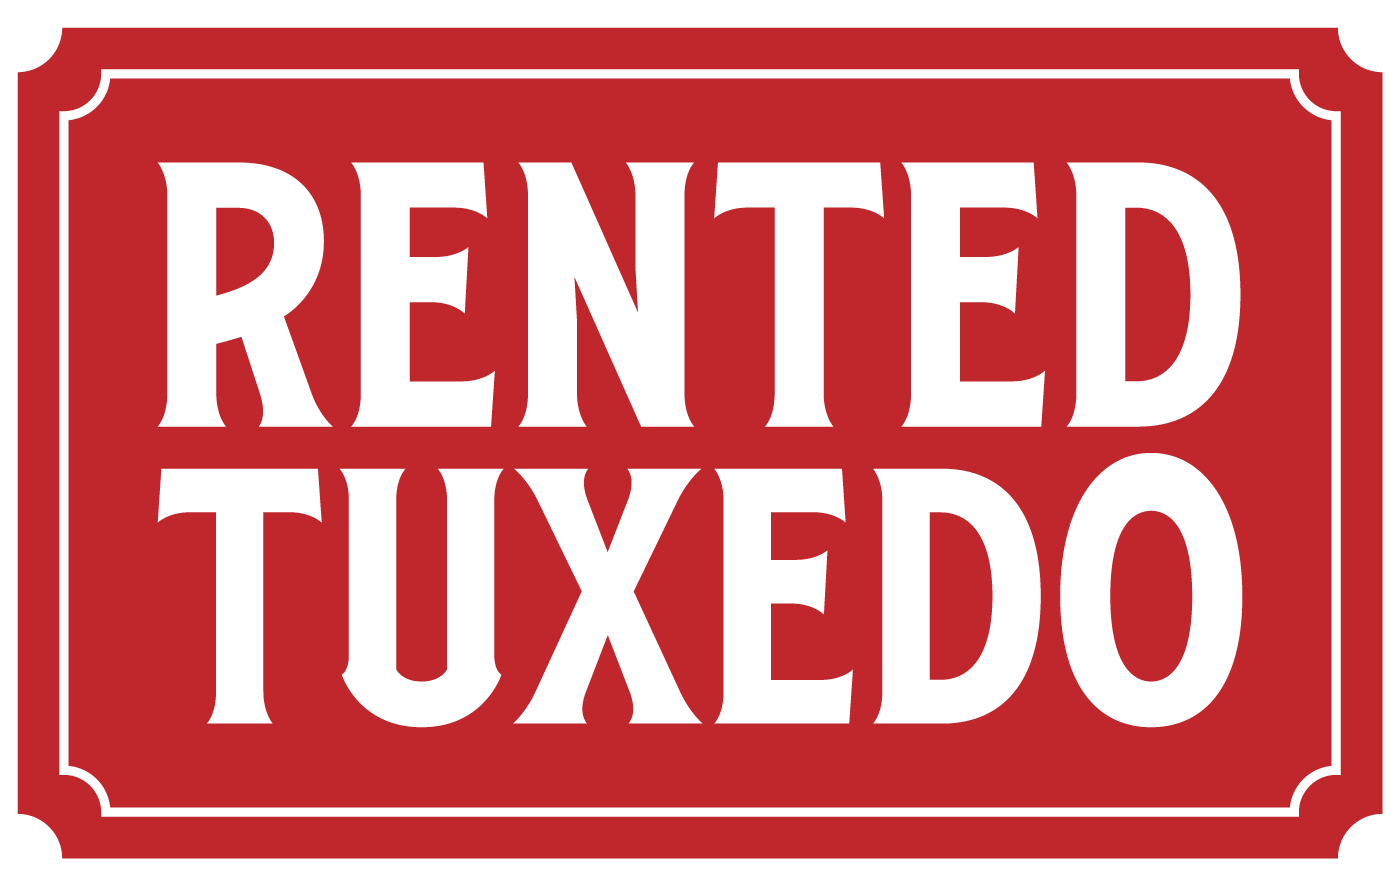 Rented Tuxedo - Denver band playing music from 1930s-1950s